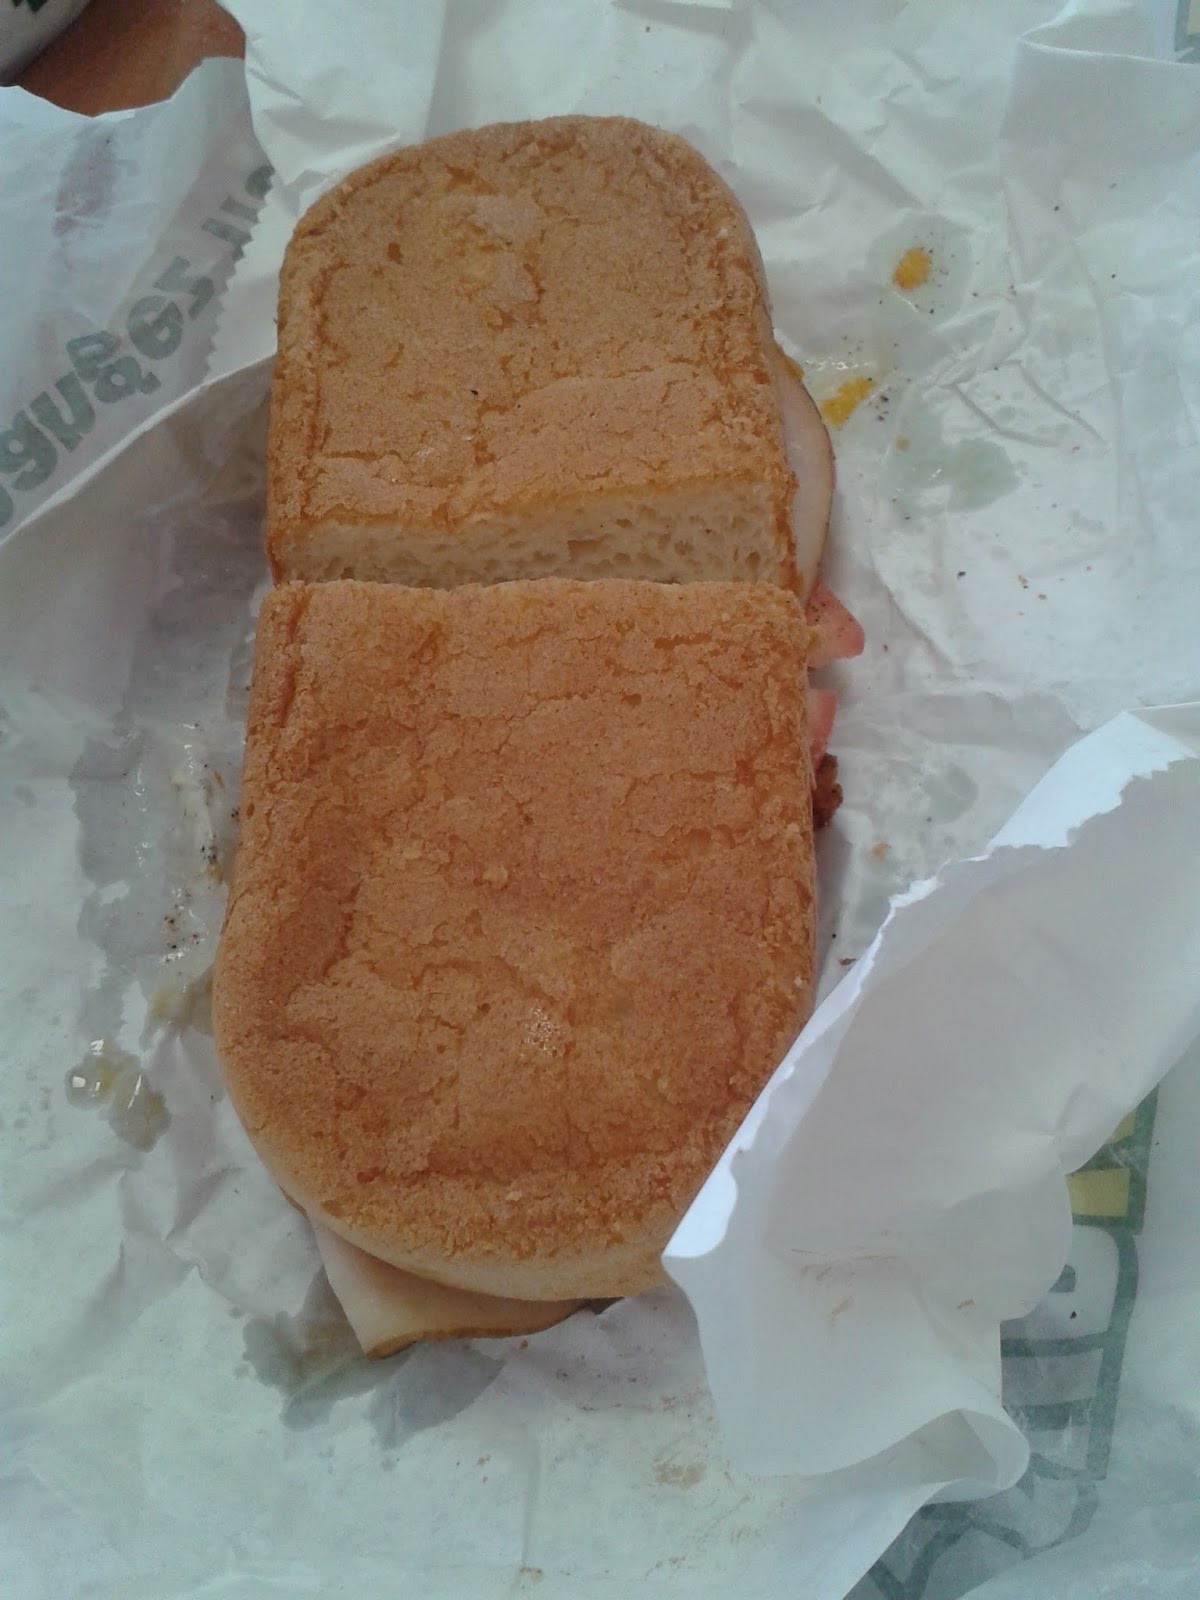 Subway With Gluten Free Bread
 You Can Know Anything Gluten Free At Subway